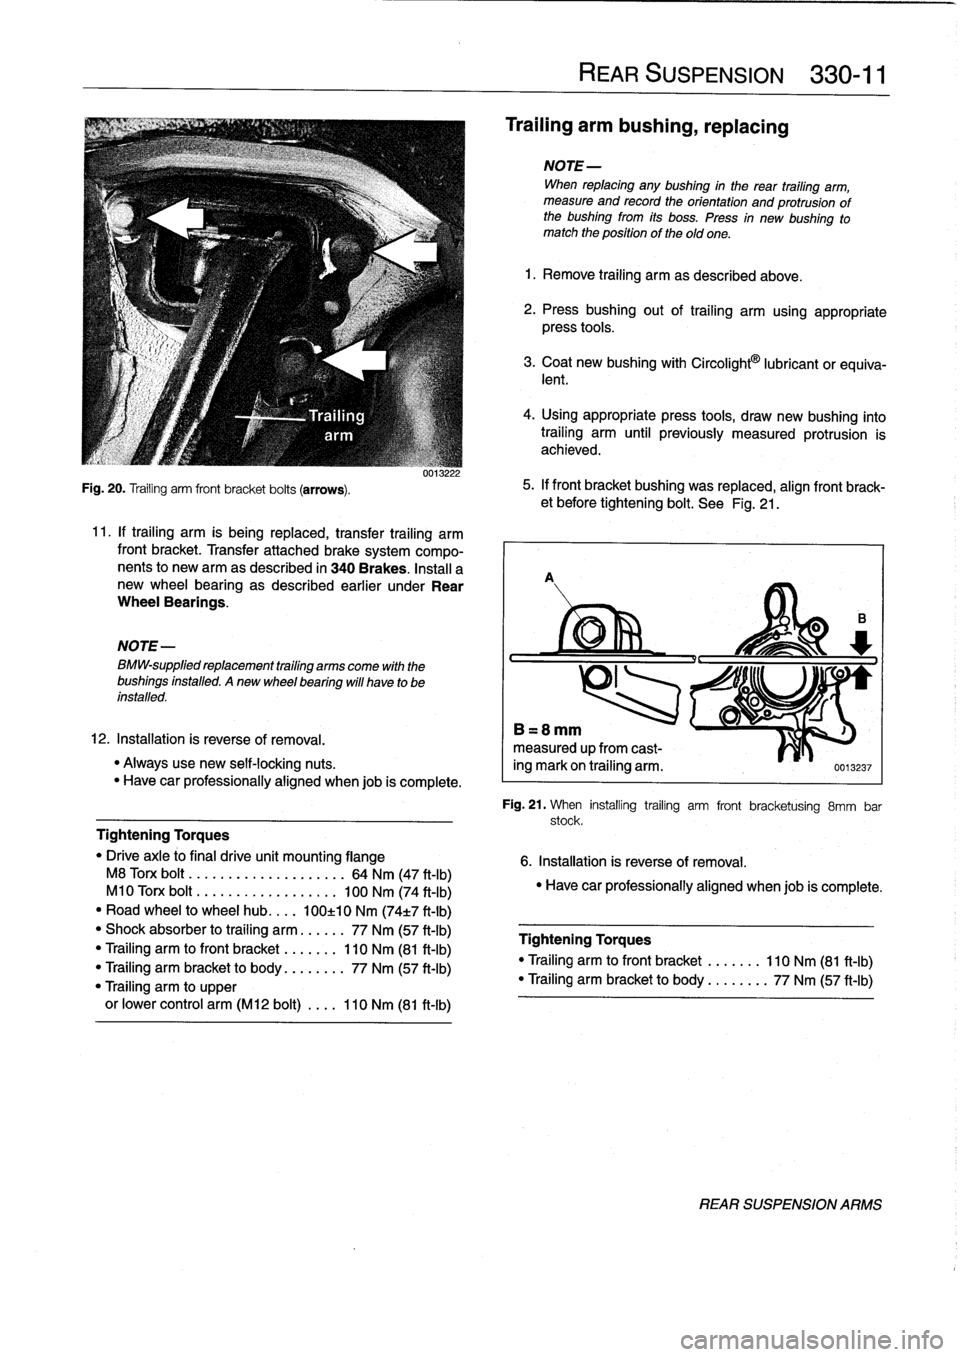 BMW 325i 1992 E36 Owners Manual 
Fig
.
20
.
Trailing
arm
front
bracket
bolts
(arrows)
.

NOTE-

BMW-supplied
replacement
trailing
arms
come
with
the
bushings
installed
.
Anew
wheel
bearing
will
have
to
be
installed
.

0013222

11
.
